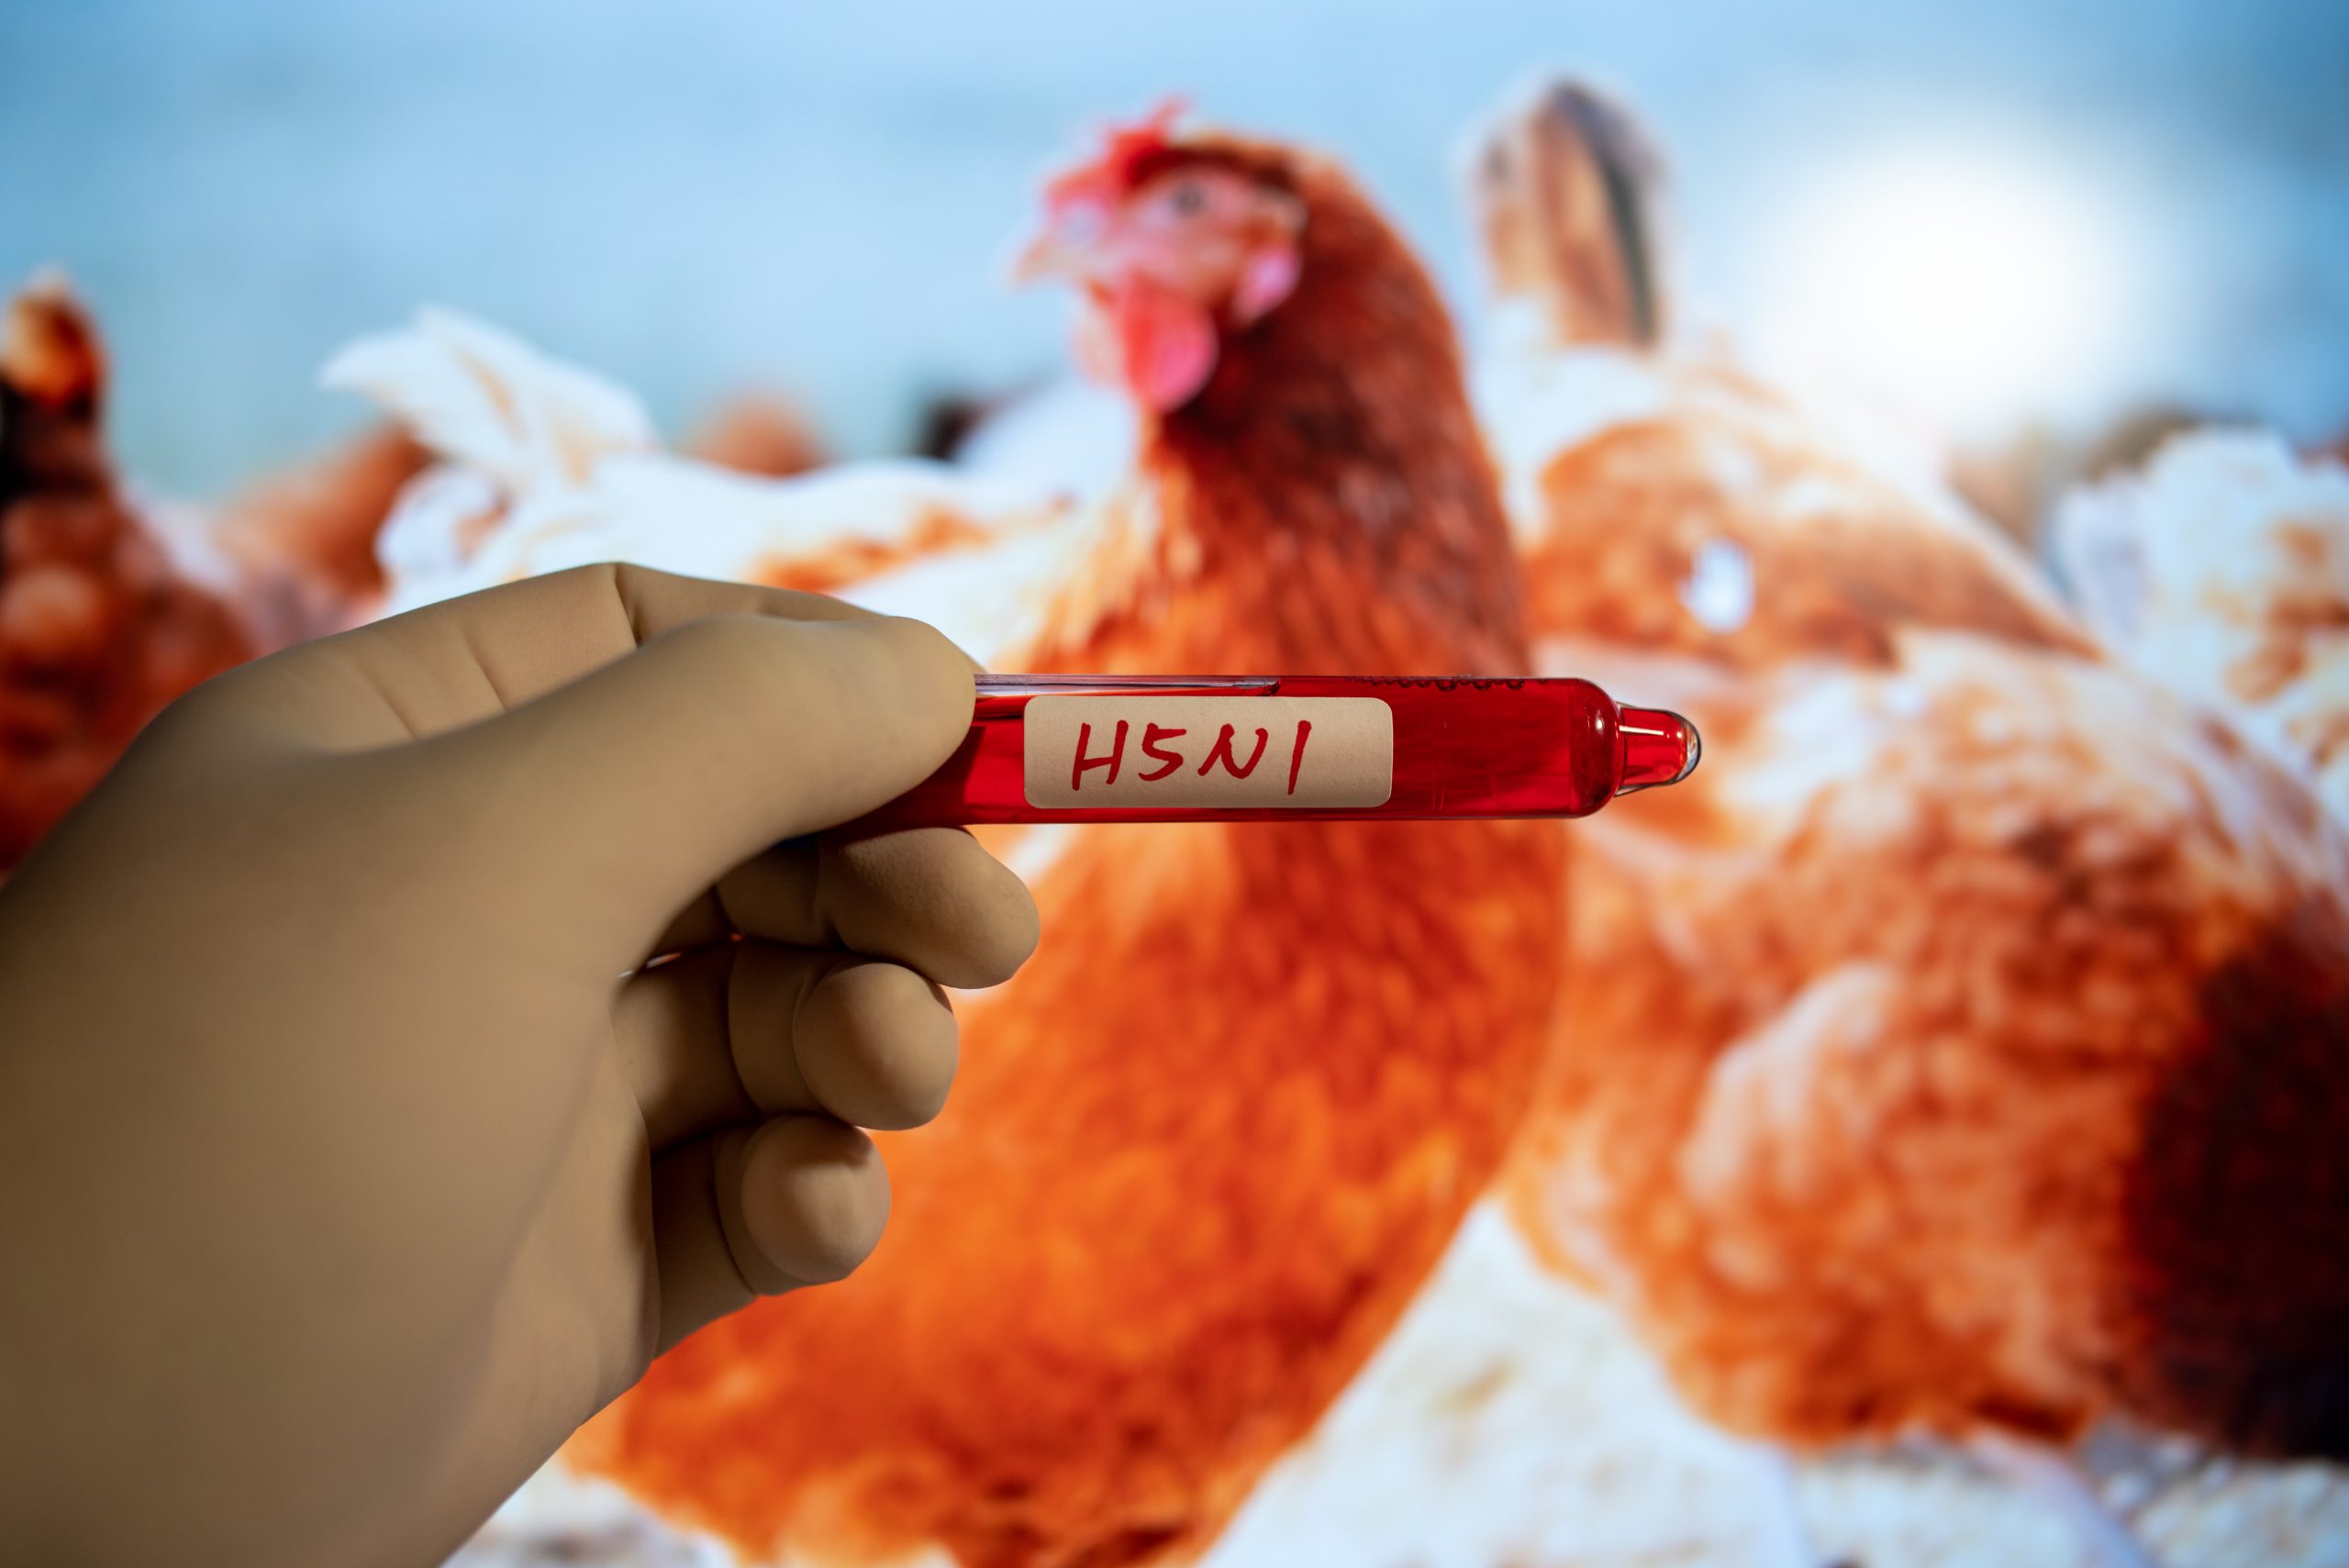 A gloved hand holds a test tub marked with the characters H5N1, for avian flu, in front of a rooster.